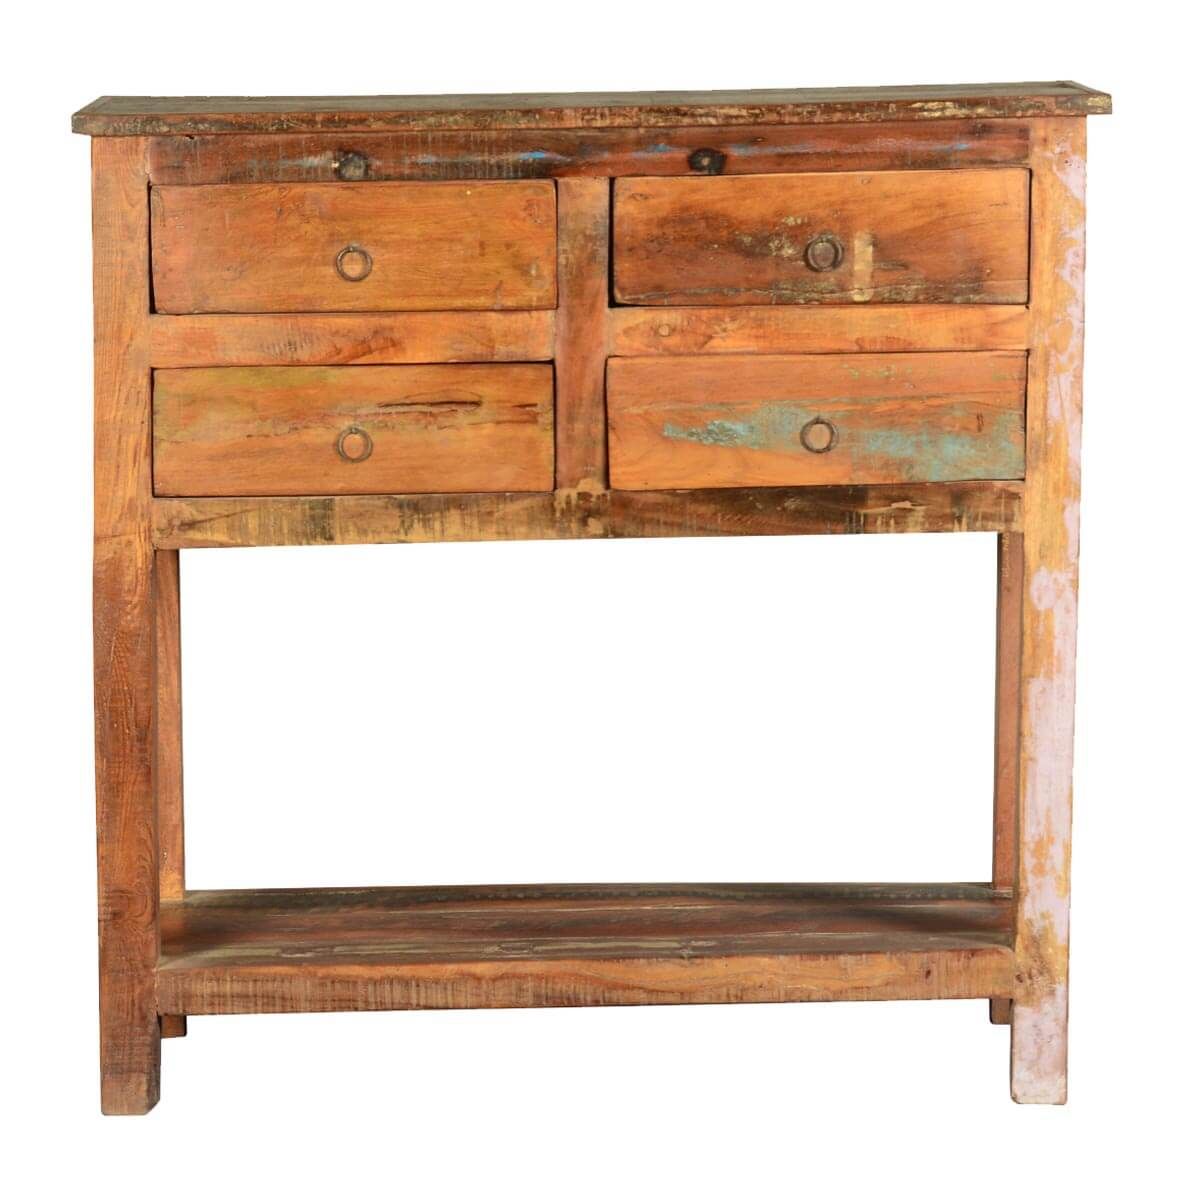 Frontier Rustic Reclaimed Wood Hall Console Table W Drawers Pertaining To Reclaimed Wood Console Tables (View 9 of 20)